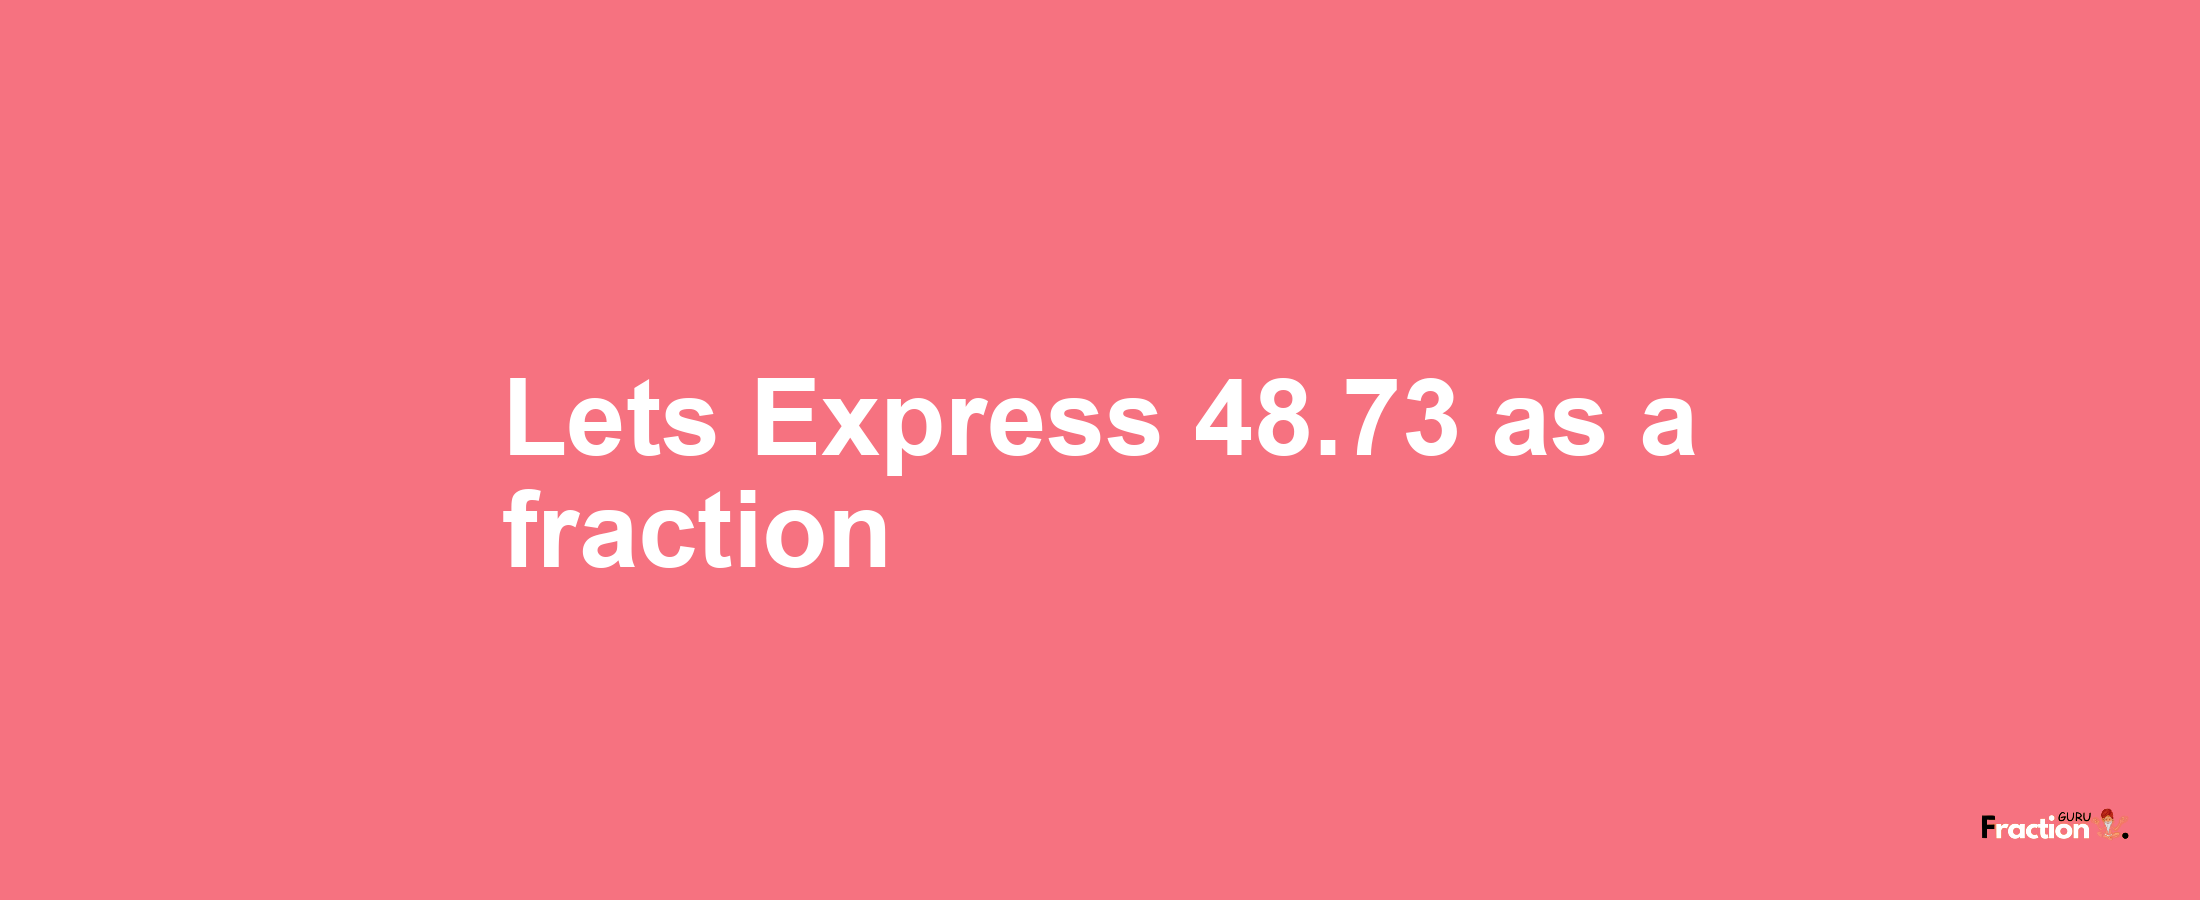 Lets Express 48.73 as afraction